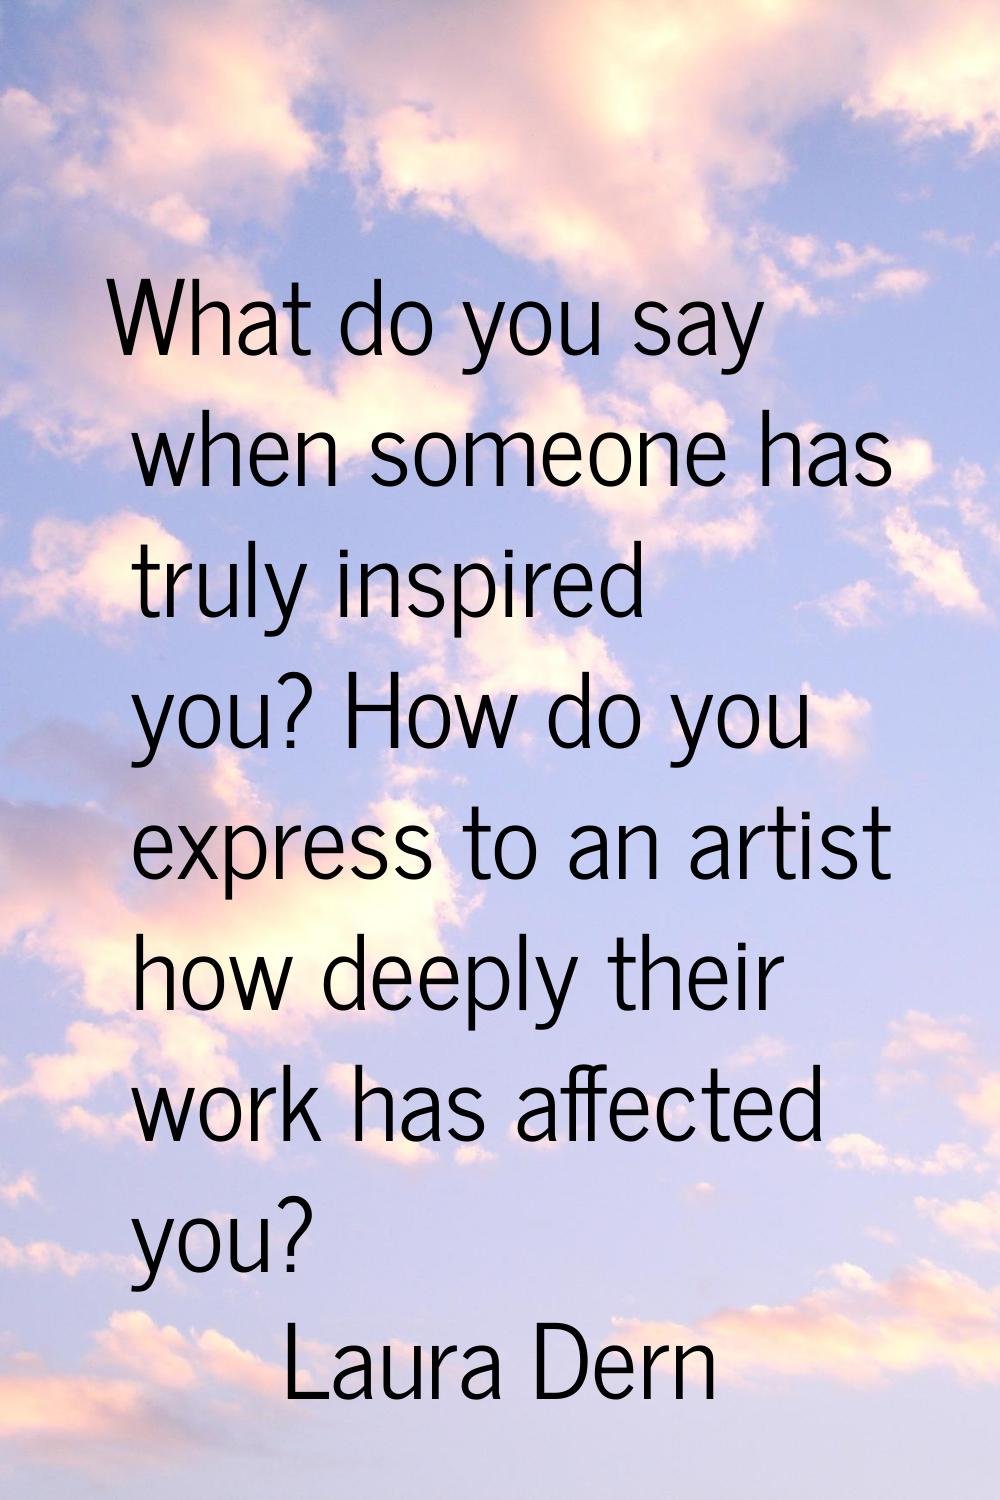 What do you say when someone has truly inspired you? How do you express to an artist how deeply the